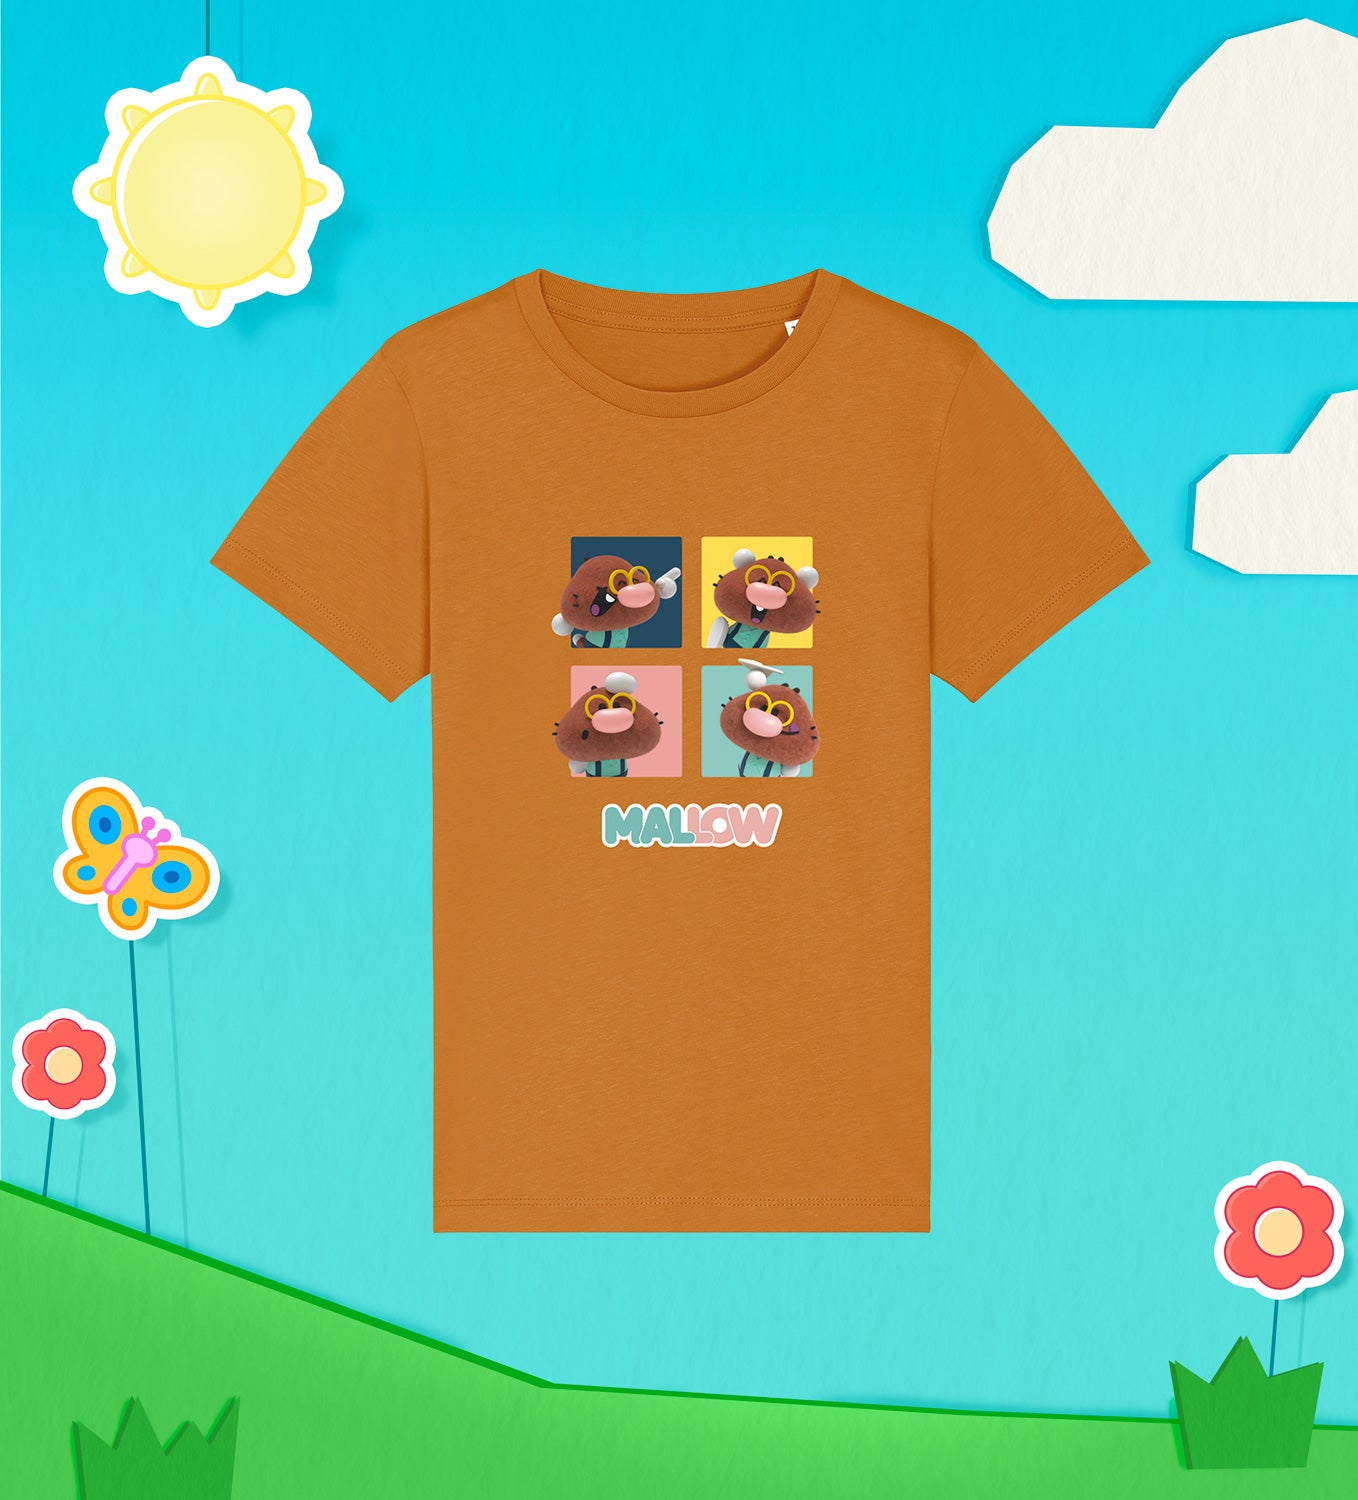 MALLOW poses in a cotton T-shirt for children